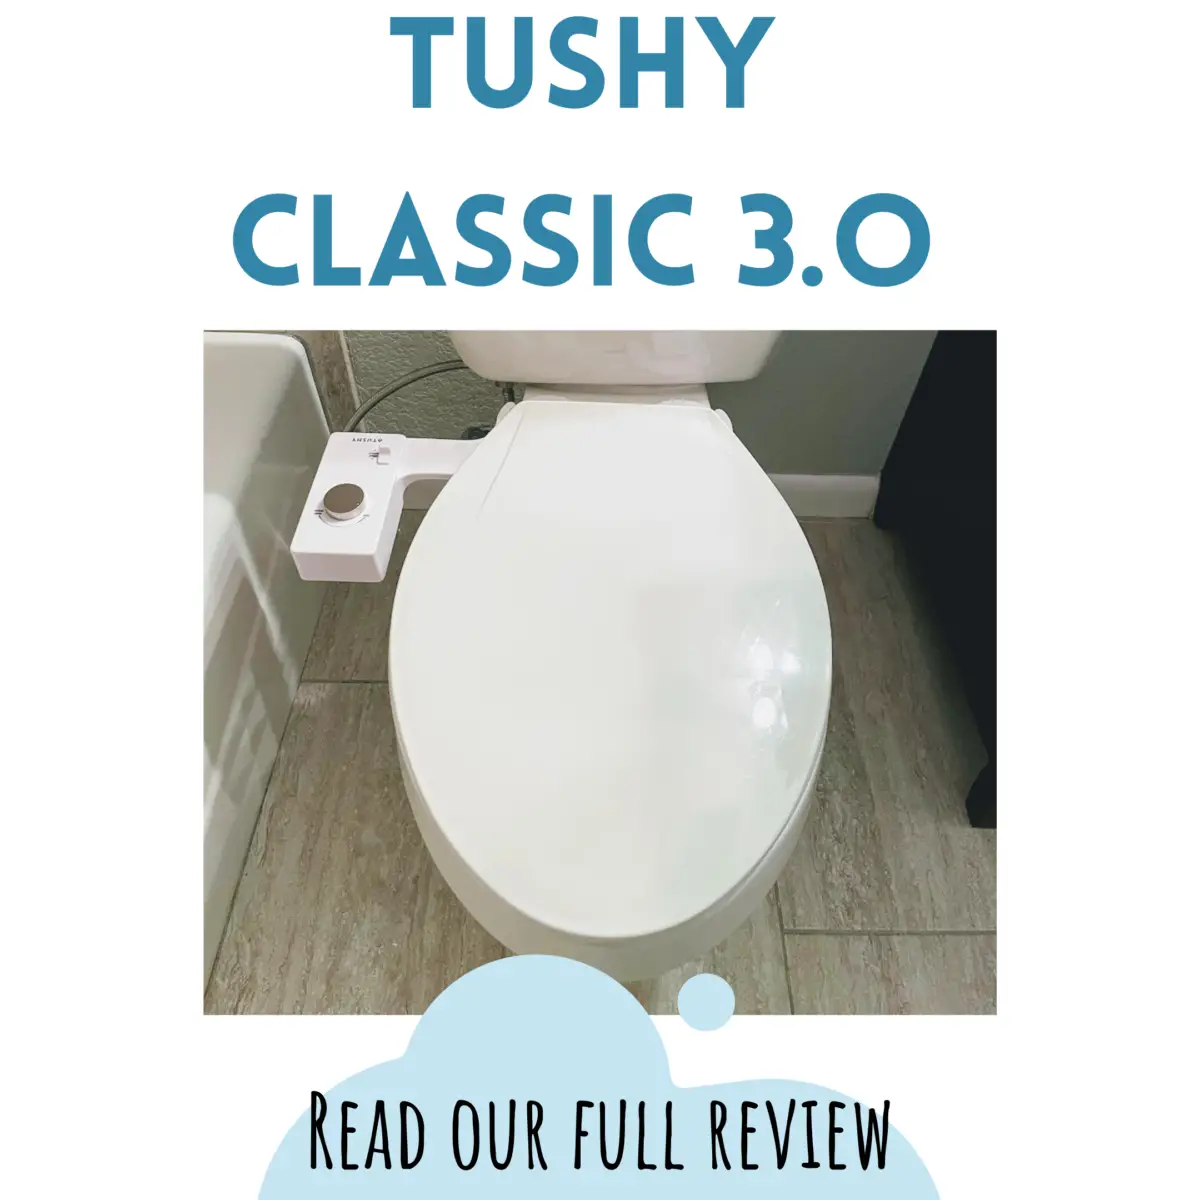 Tushy Classic 3.0 Review - Is it worth the hype?